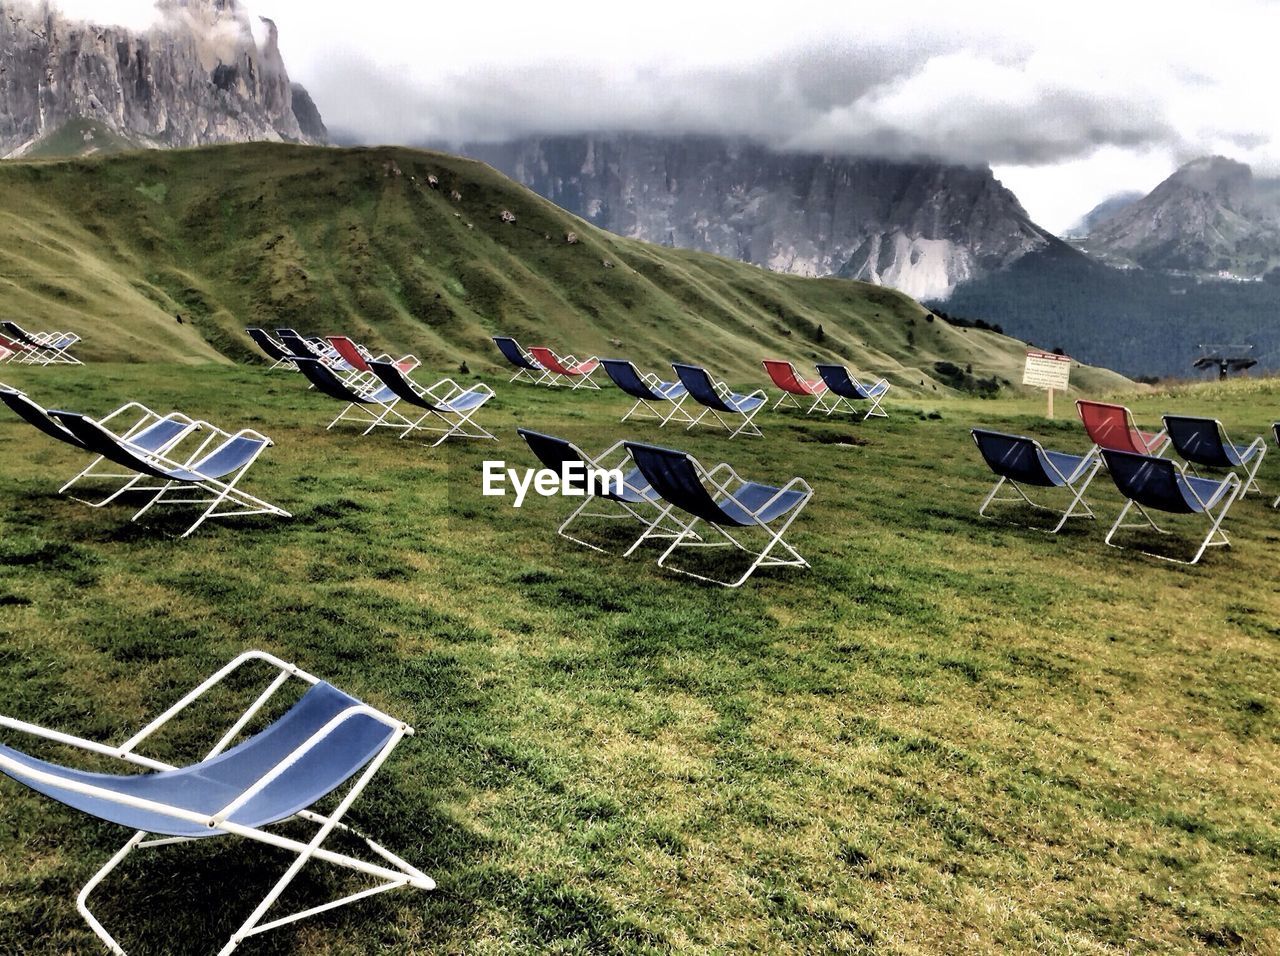 Empty foldable chairs on grassy field